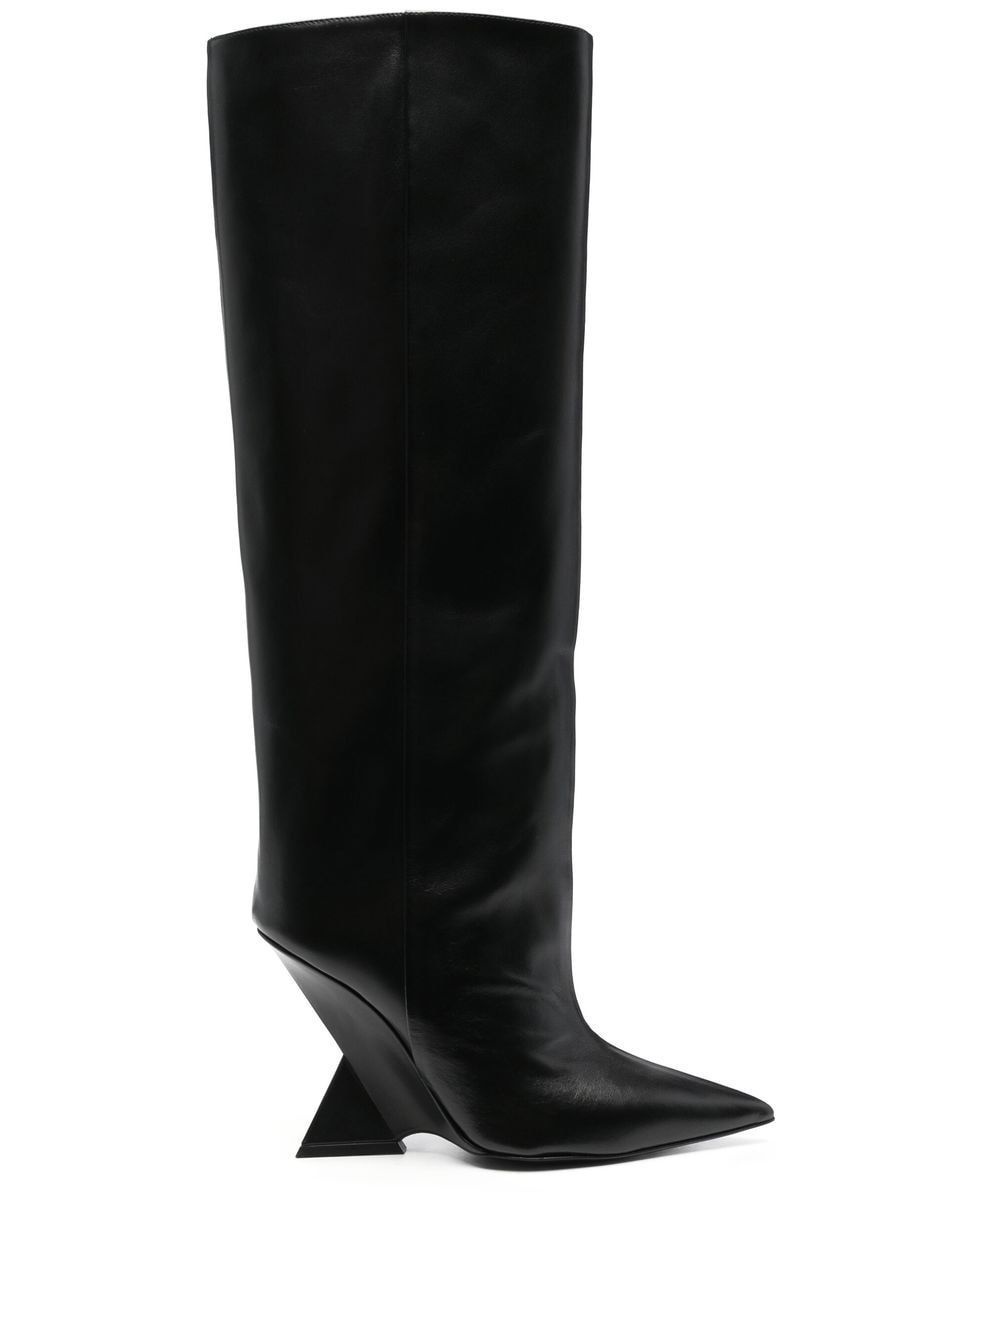 CHEOPE CALF LEATHER TUBE BOOT 105mm - 1